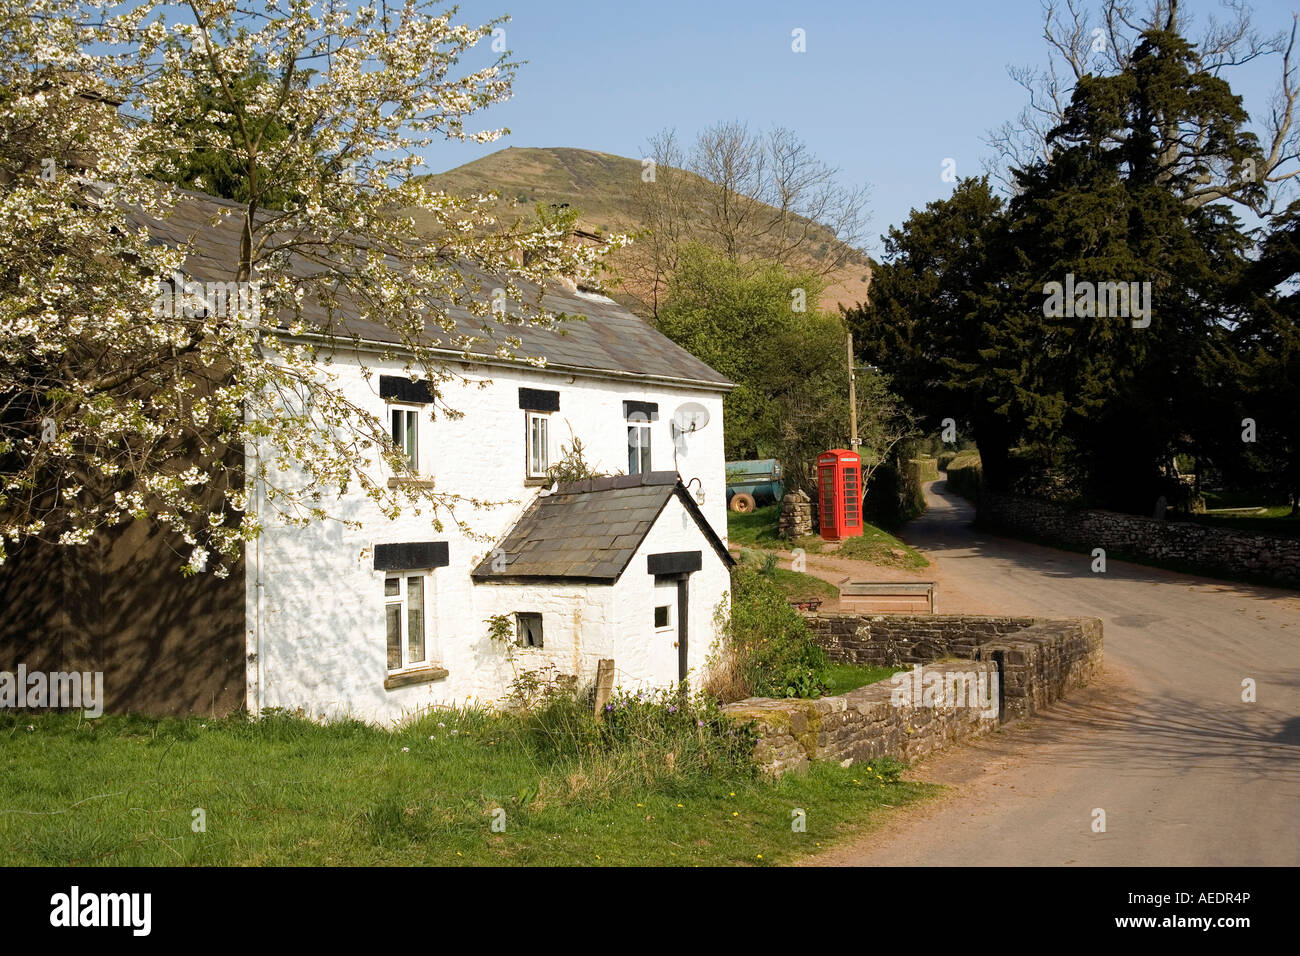 UK Wales Powys Black Mountains Vale of Ewyas Capel y ffin roadside farmhouse and K6 phone box Stock Photo